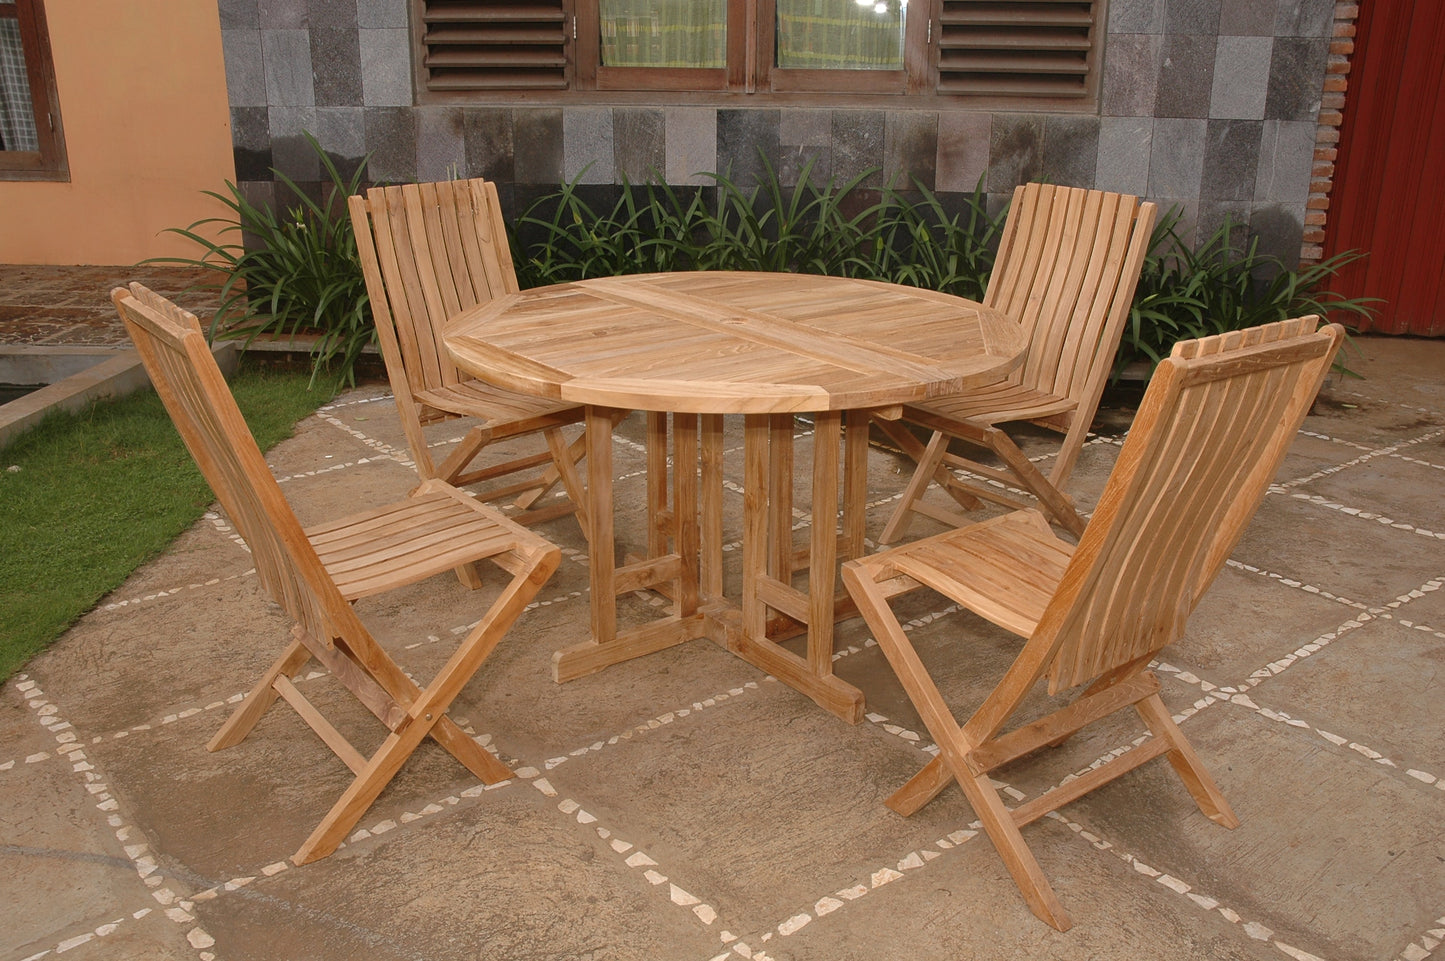 SET-34 Butterfly Comfort 5-pc Dining Table Set